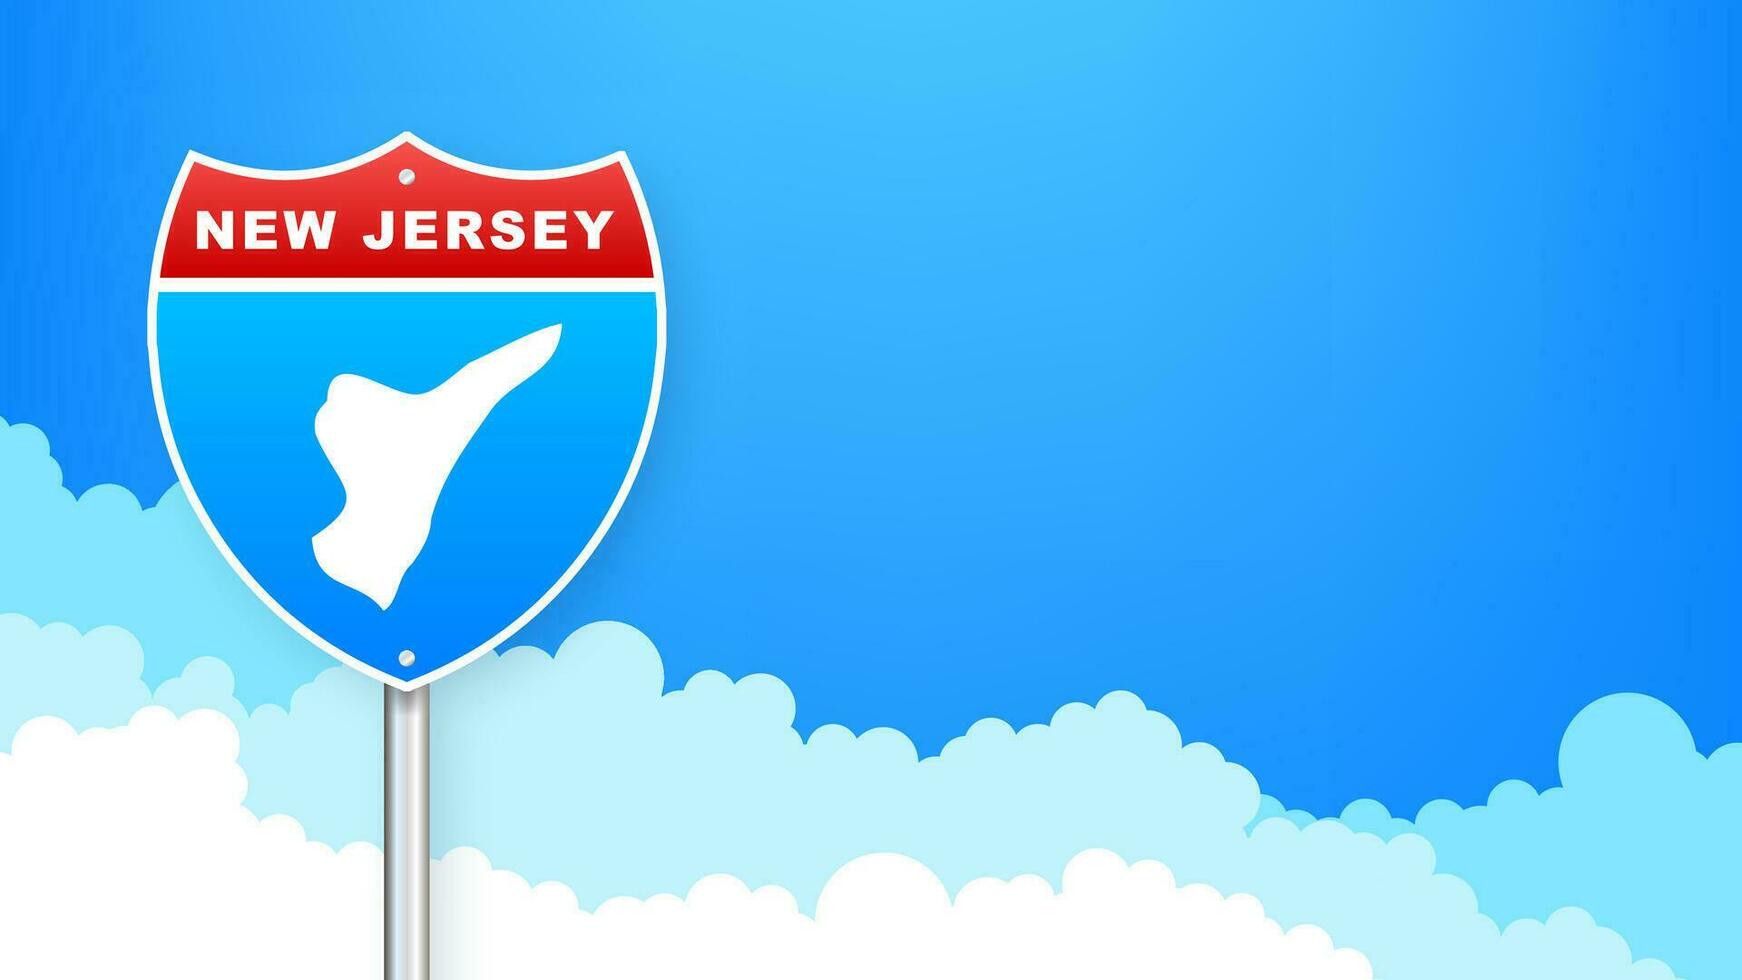 New Jersey map on road sign. Welcome to State of New Jersey. Vector illustration